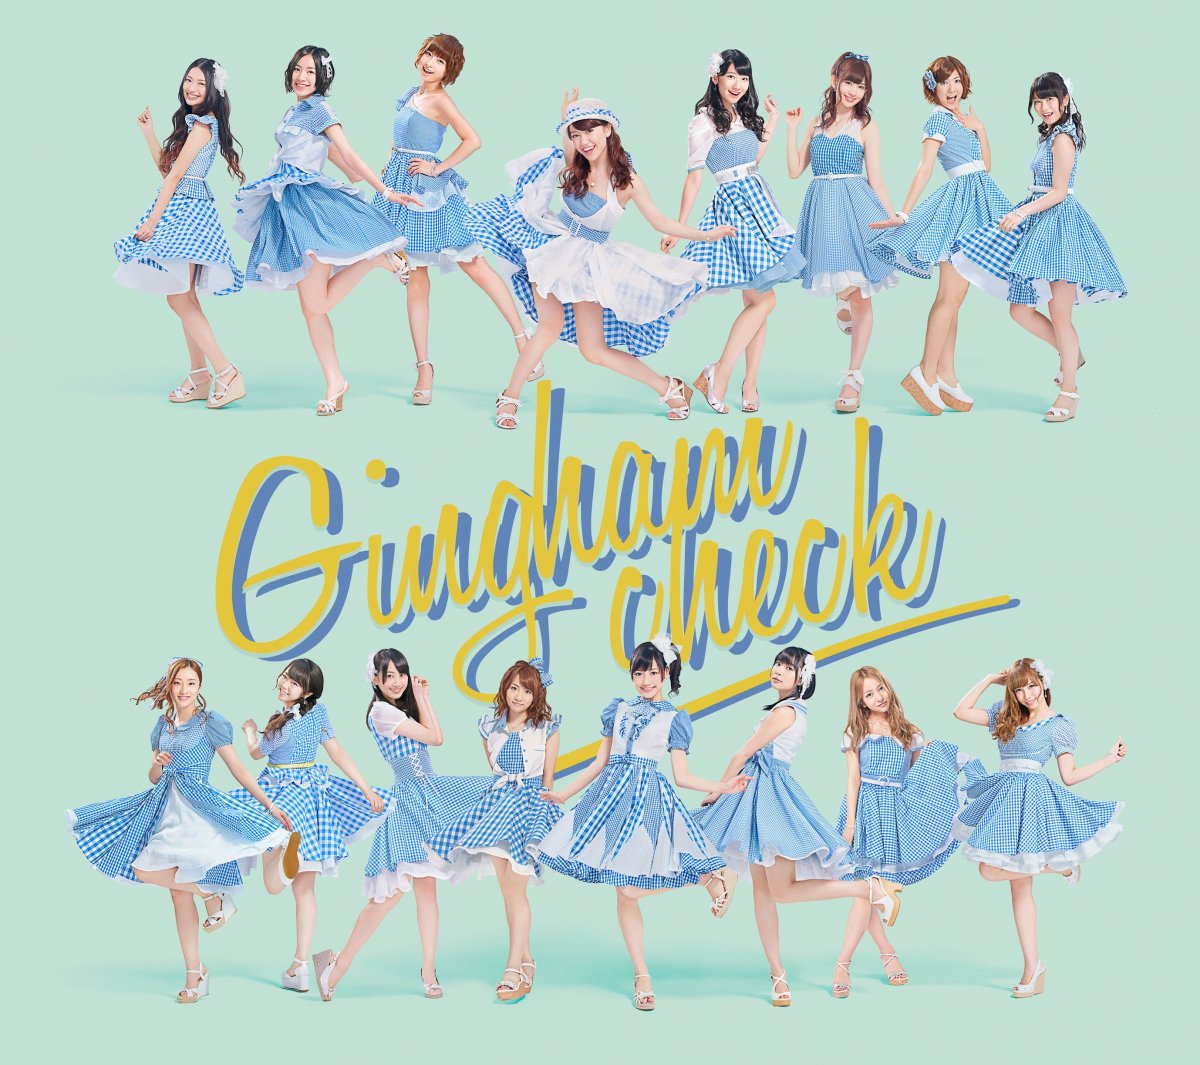 a-review-and-analysis-of-the-song-gingham-check-by-the-japanese-pop-music-group-akb48